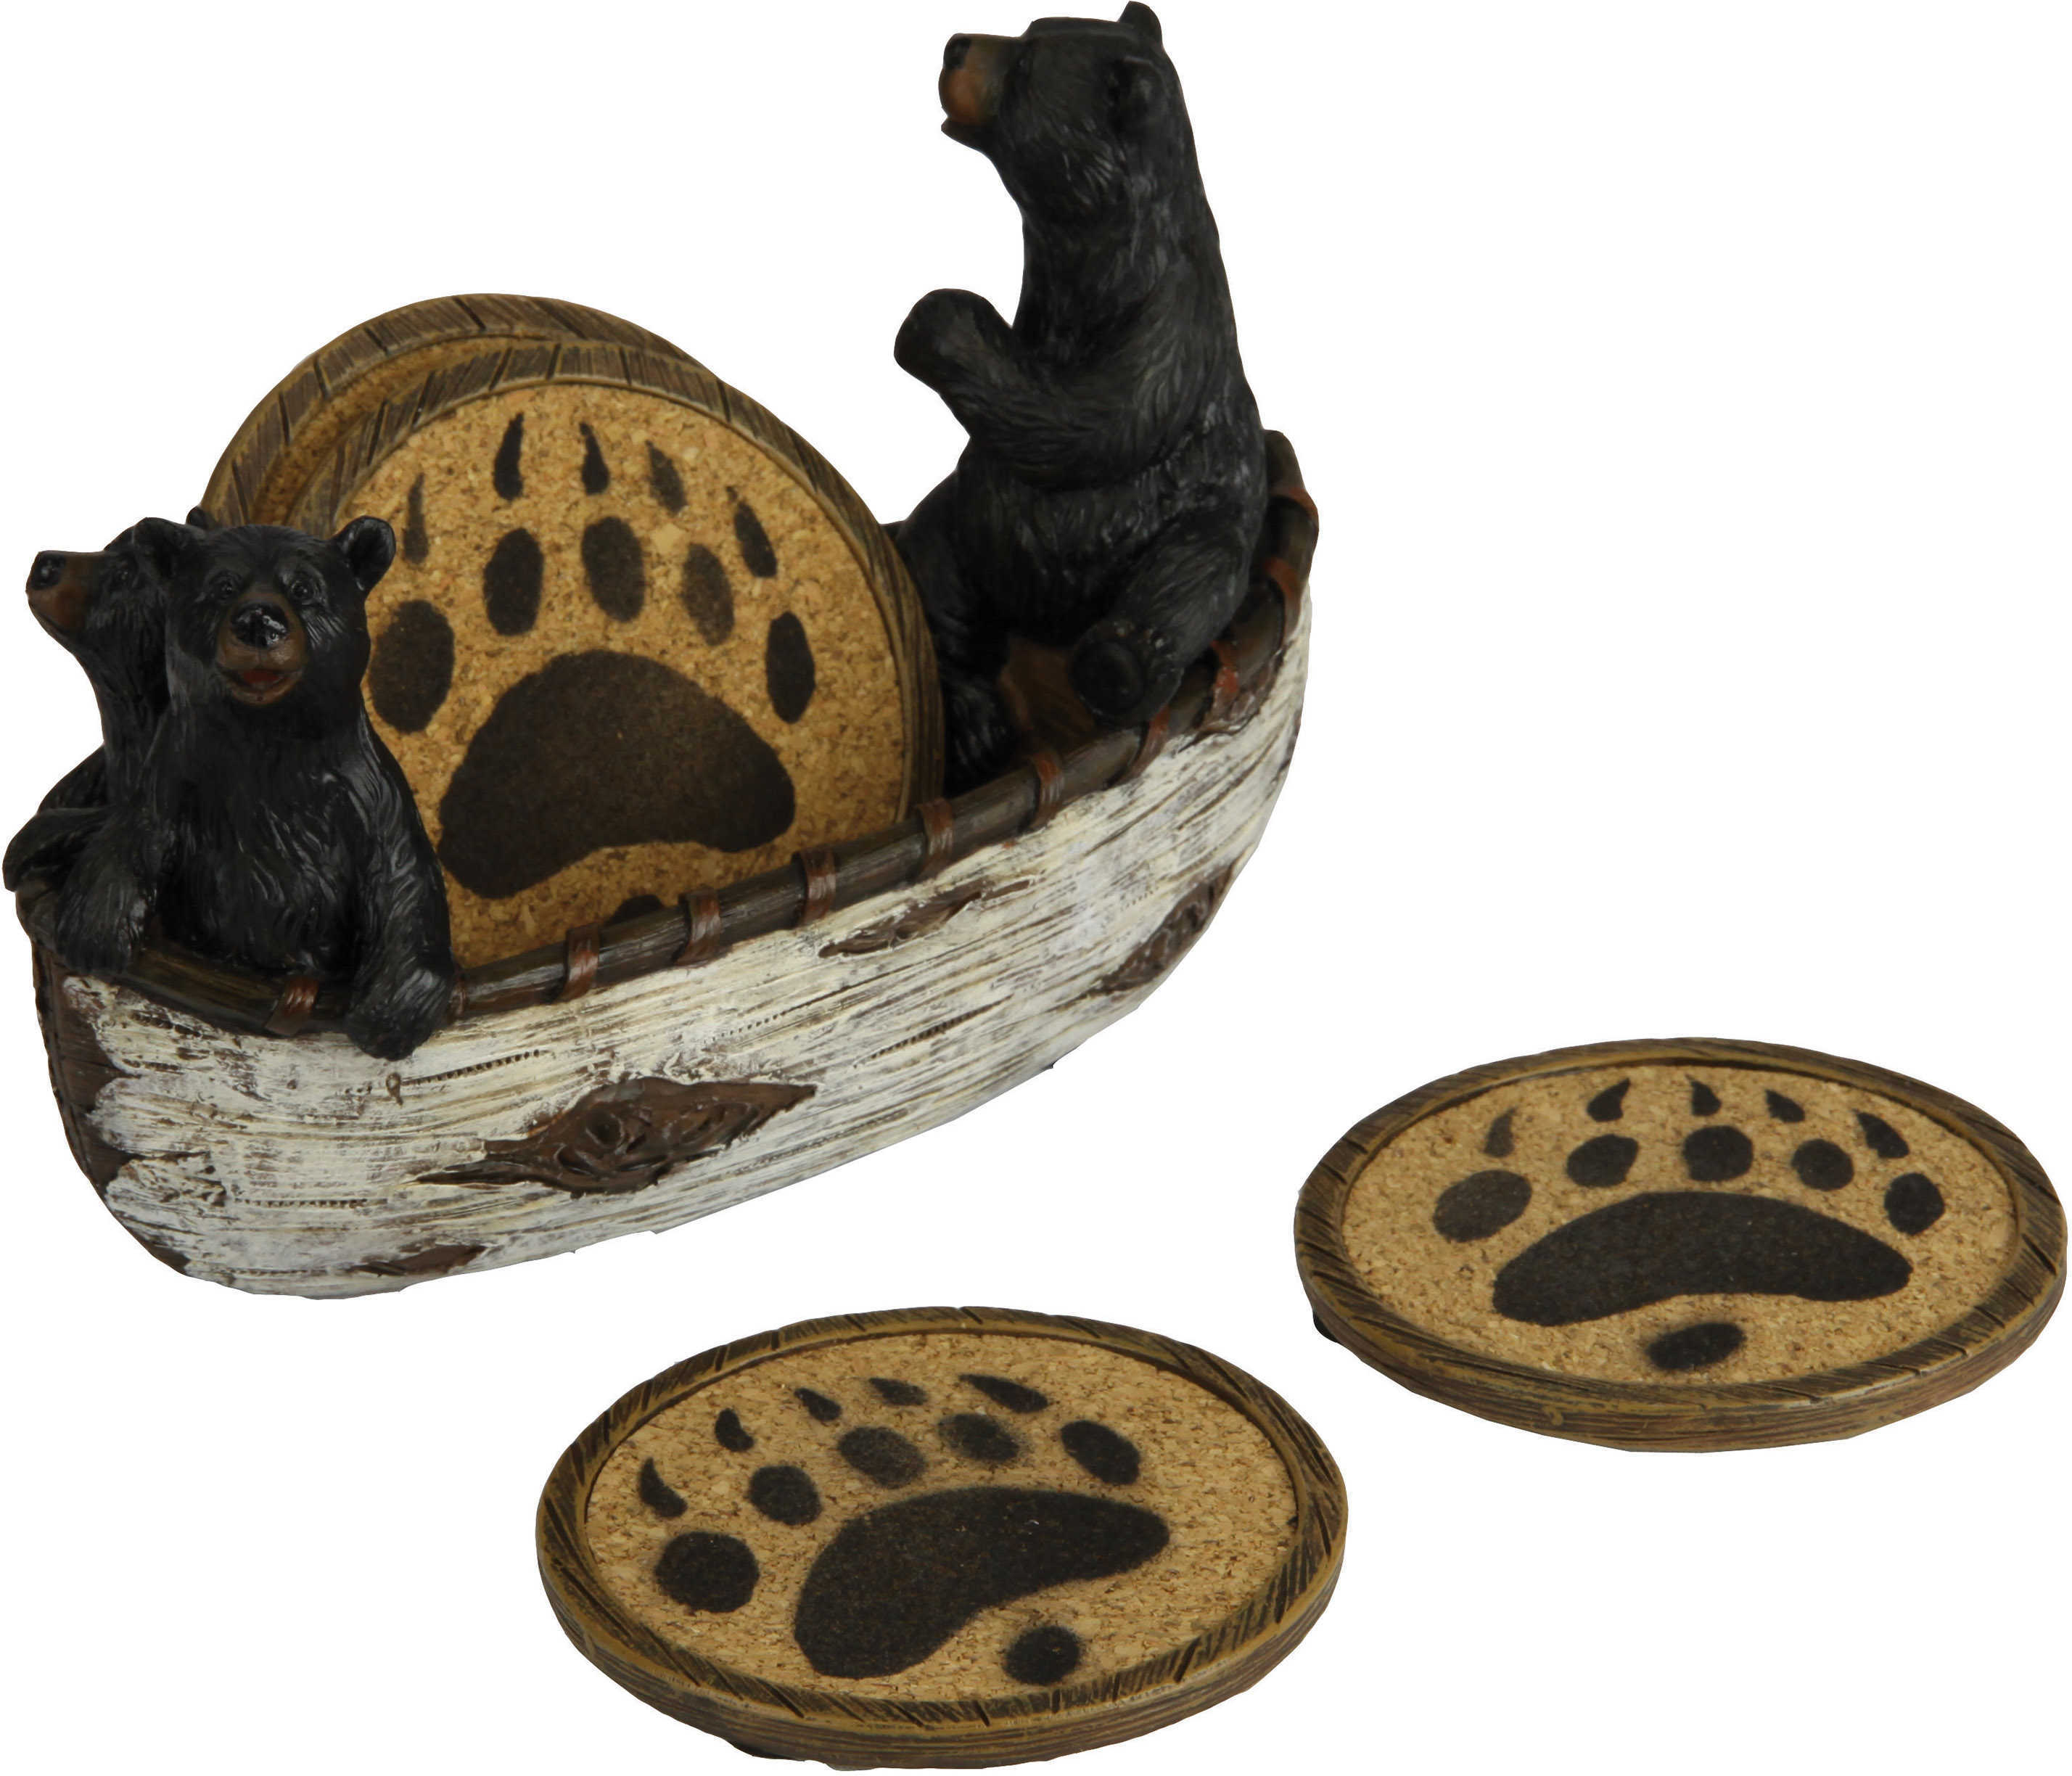 Rivers Edge Products Bears In Boat Coaster Set Md: 2040